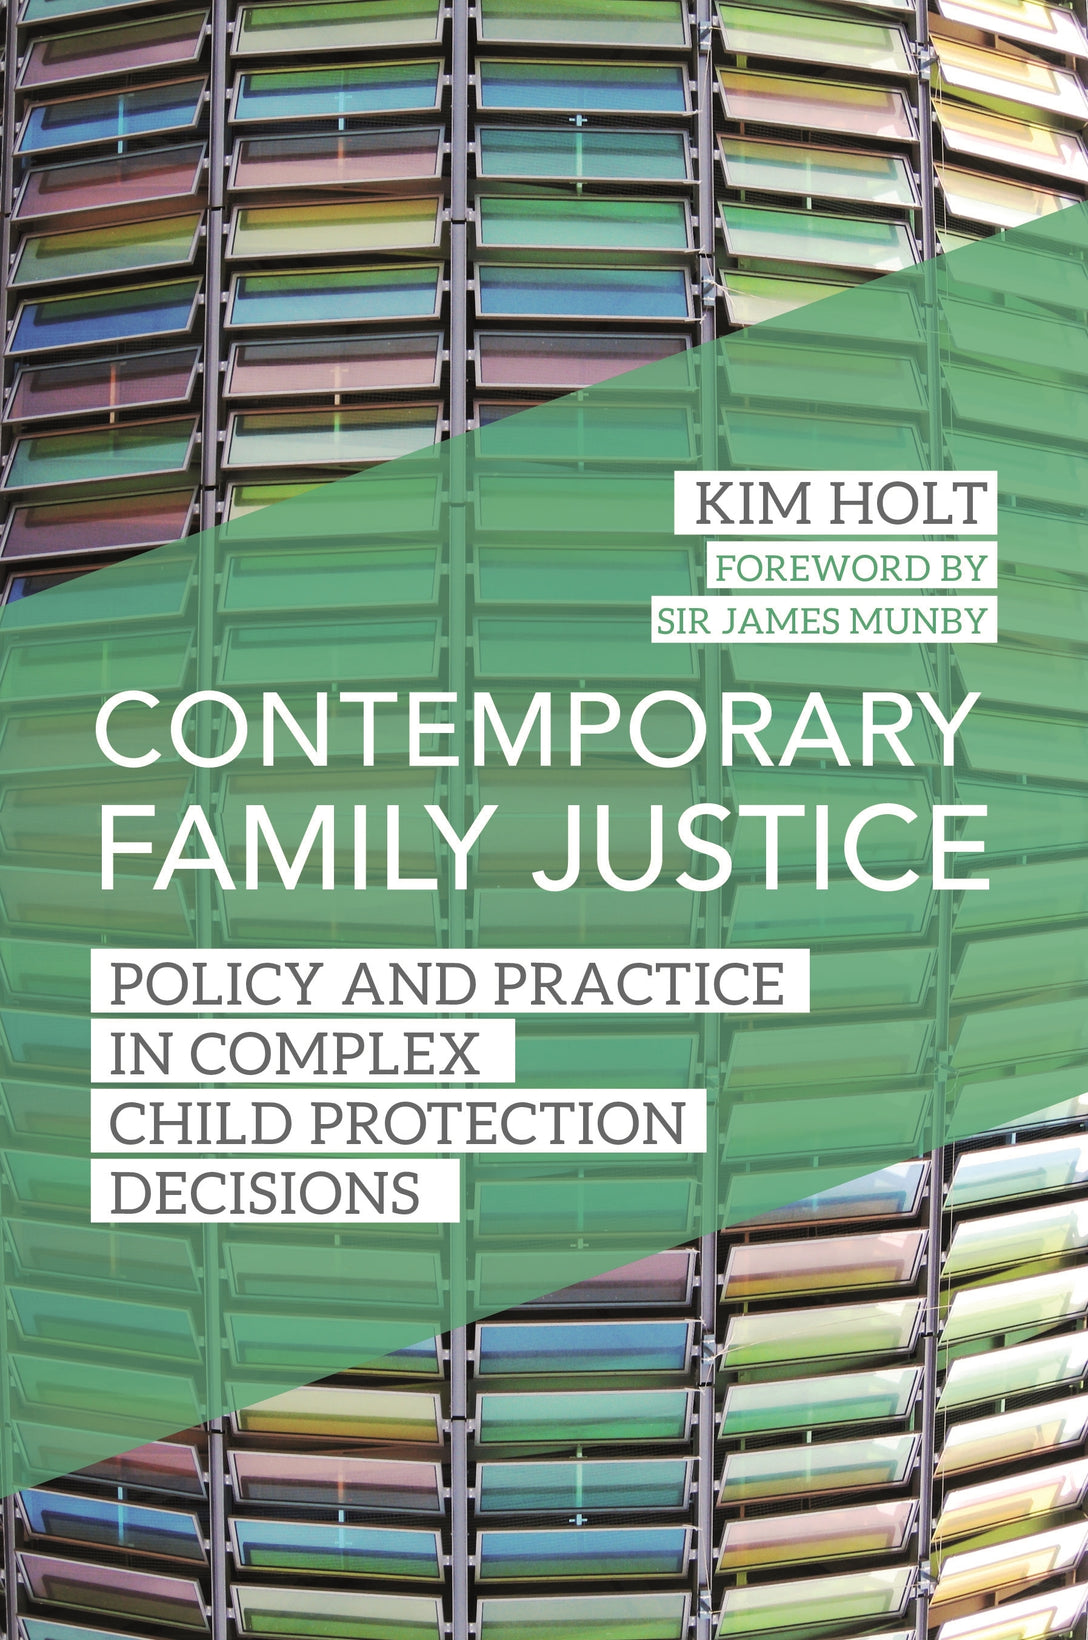 Contemporary Family Justice by Sir James Munby, Kim Holt